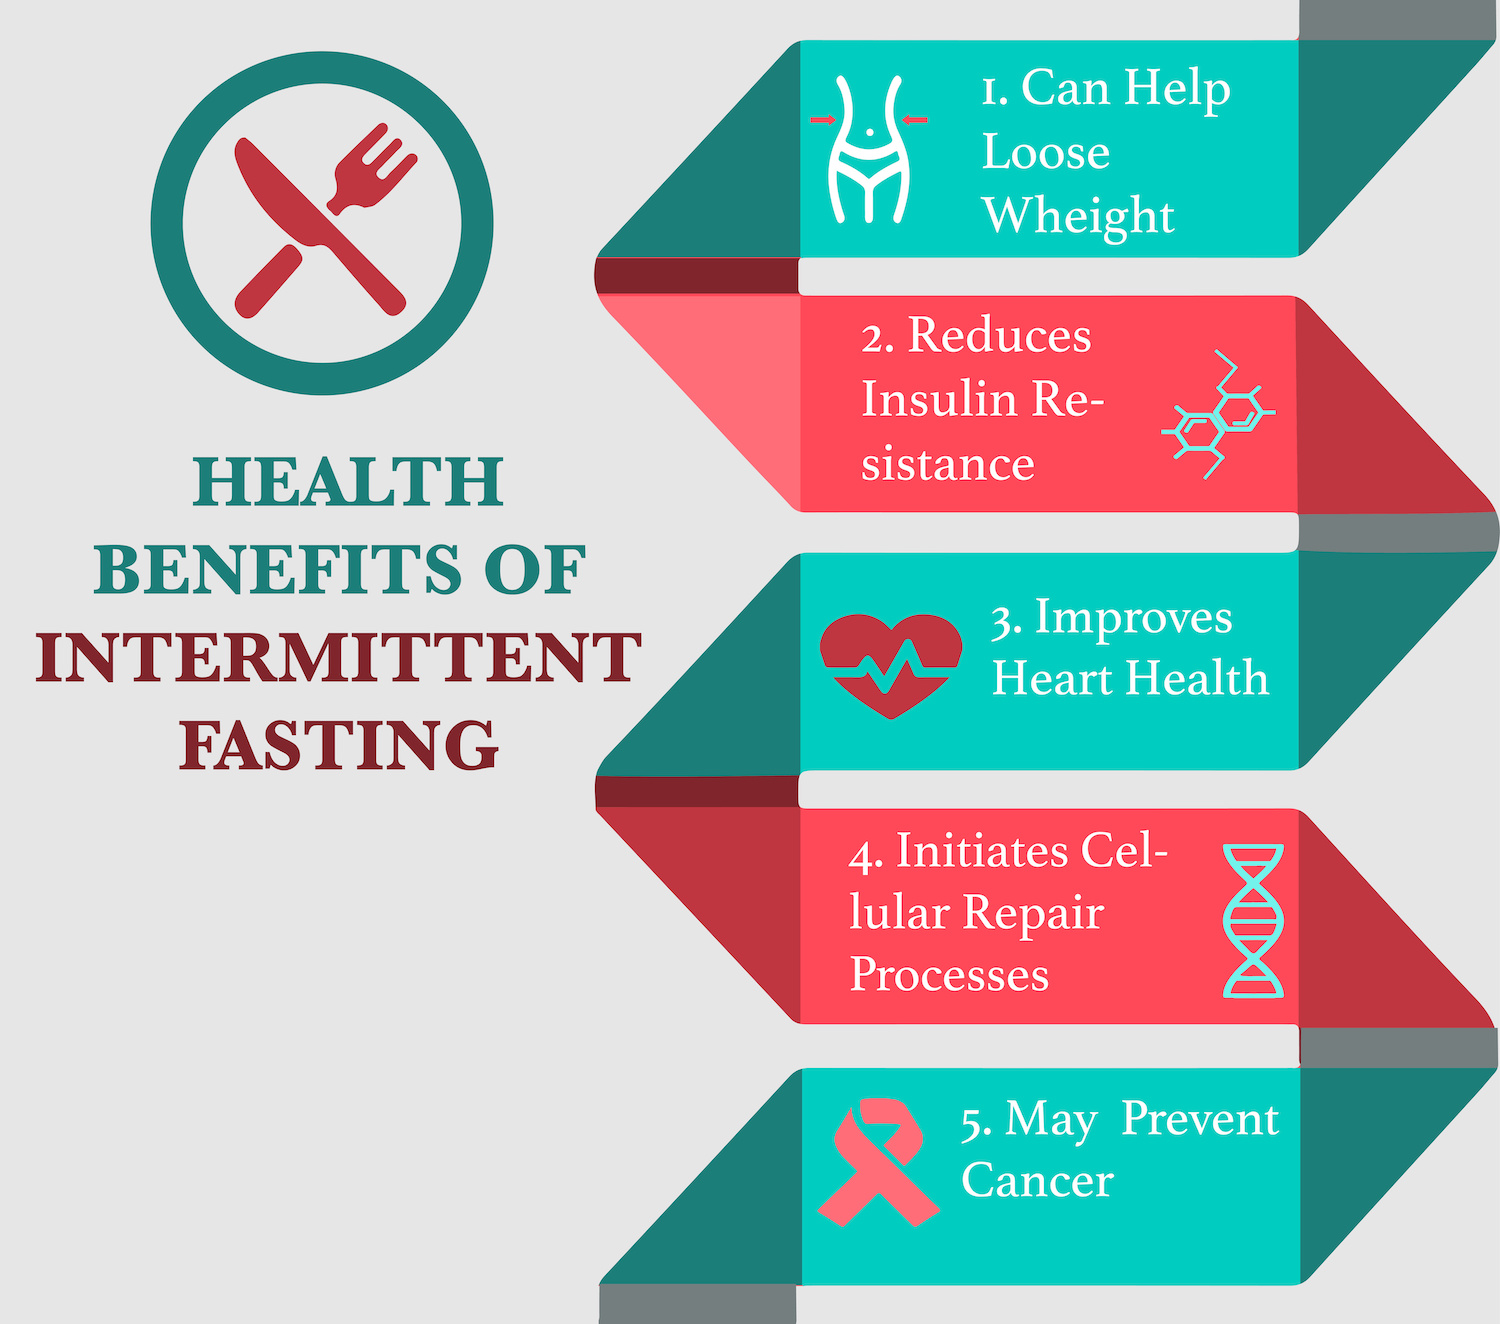 Intermittent fasting has a lot more benefits on your productivity